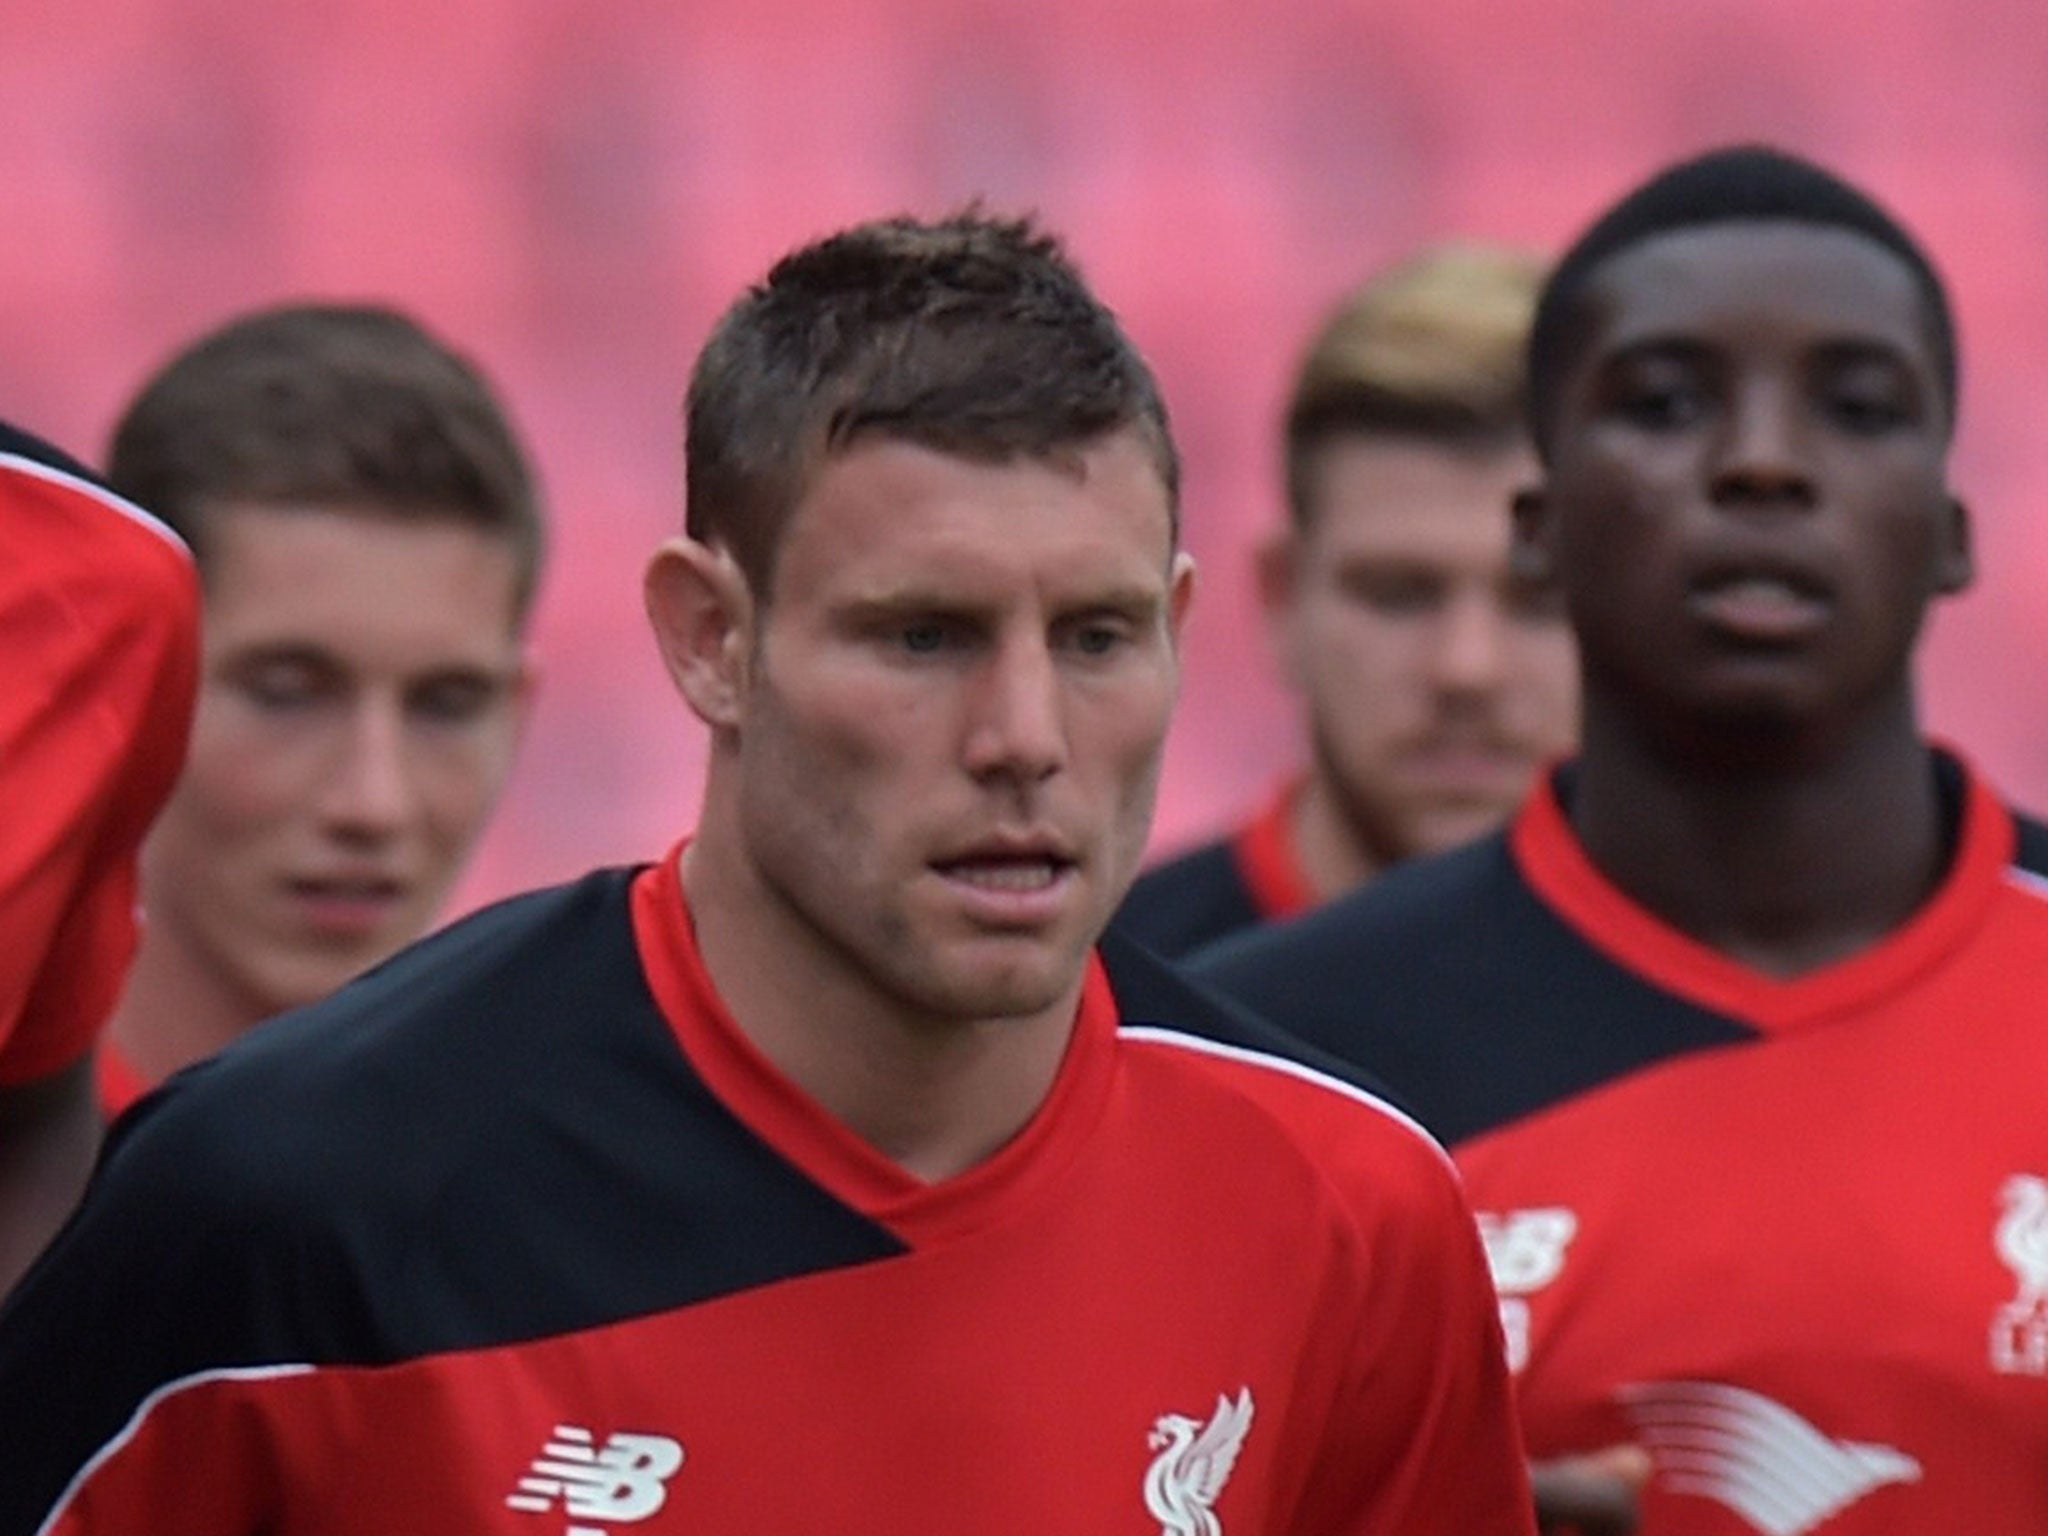 James Milner admitted being frustrated by lack of playing opportunities at Manchester City